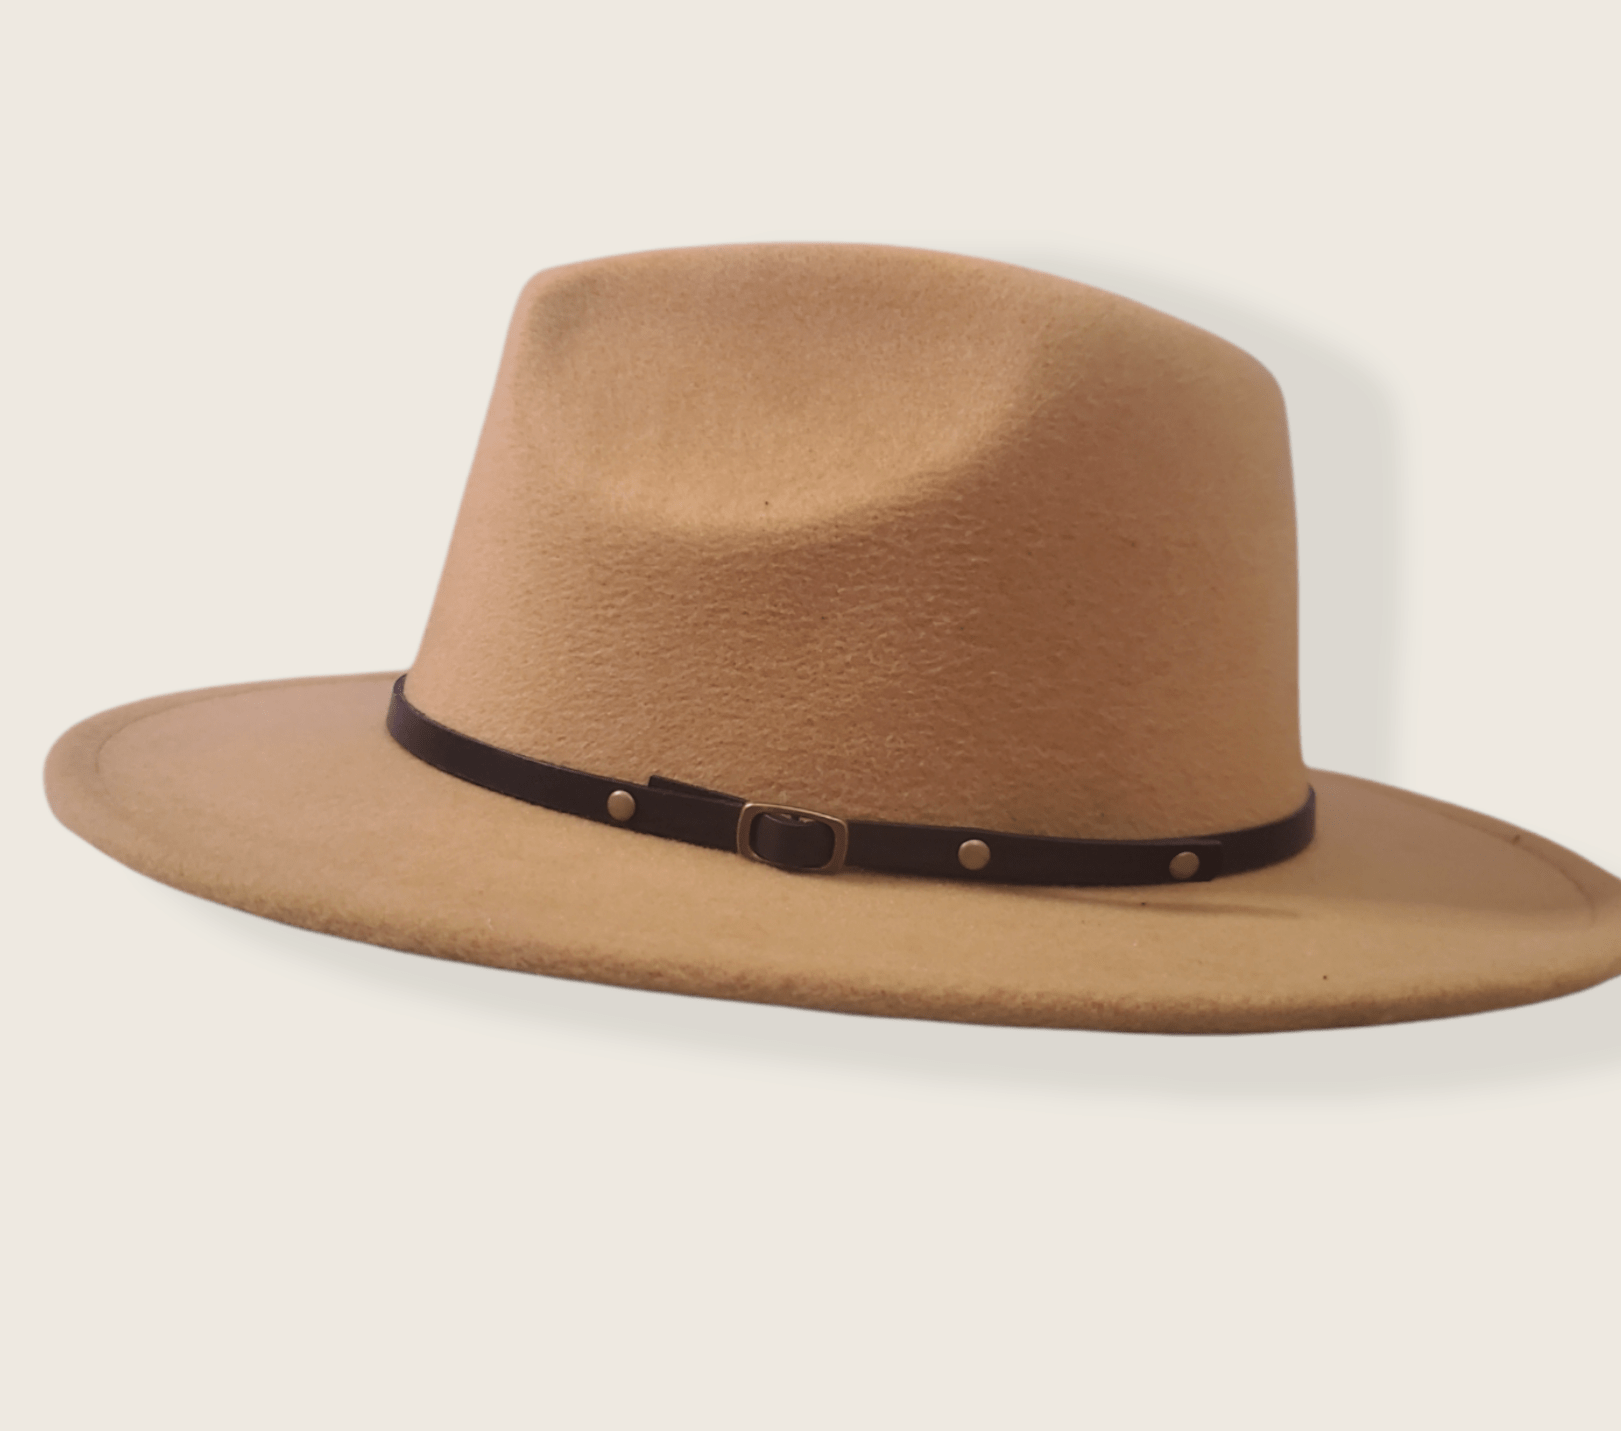 YD Boutique Hats Camel Felt Fedora Hat With Leather Band (Tan)